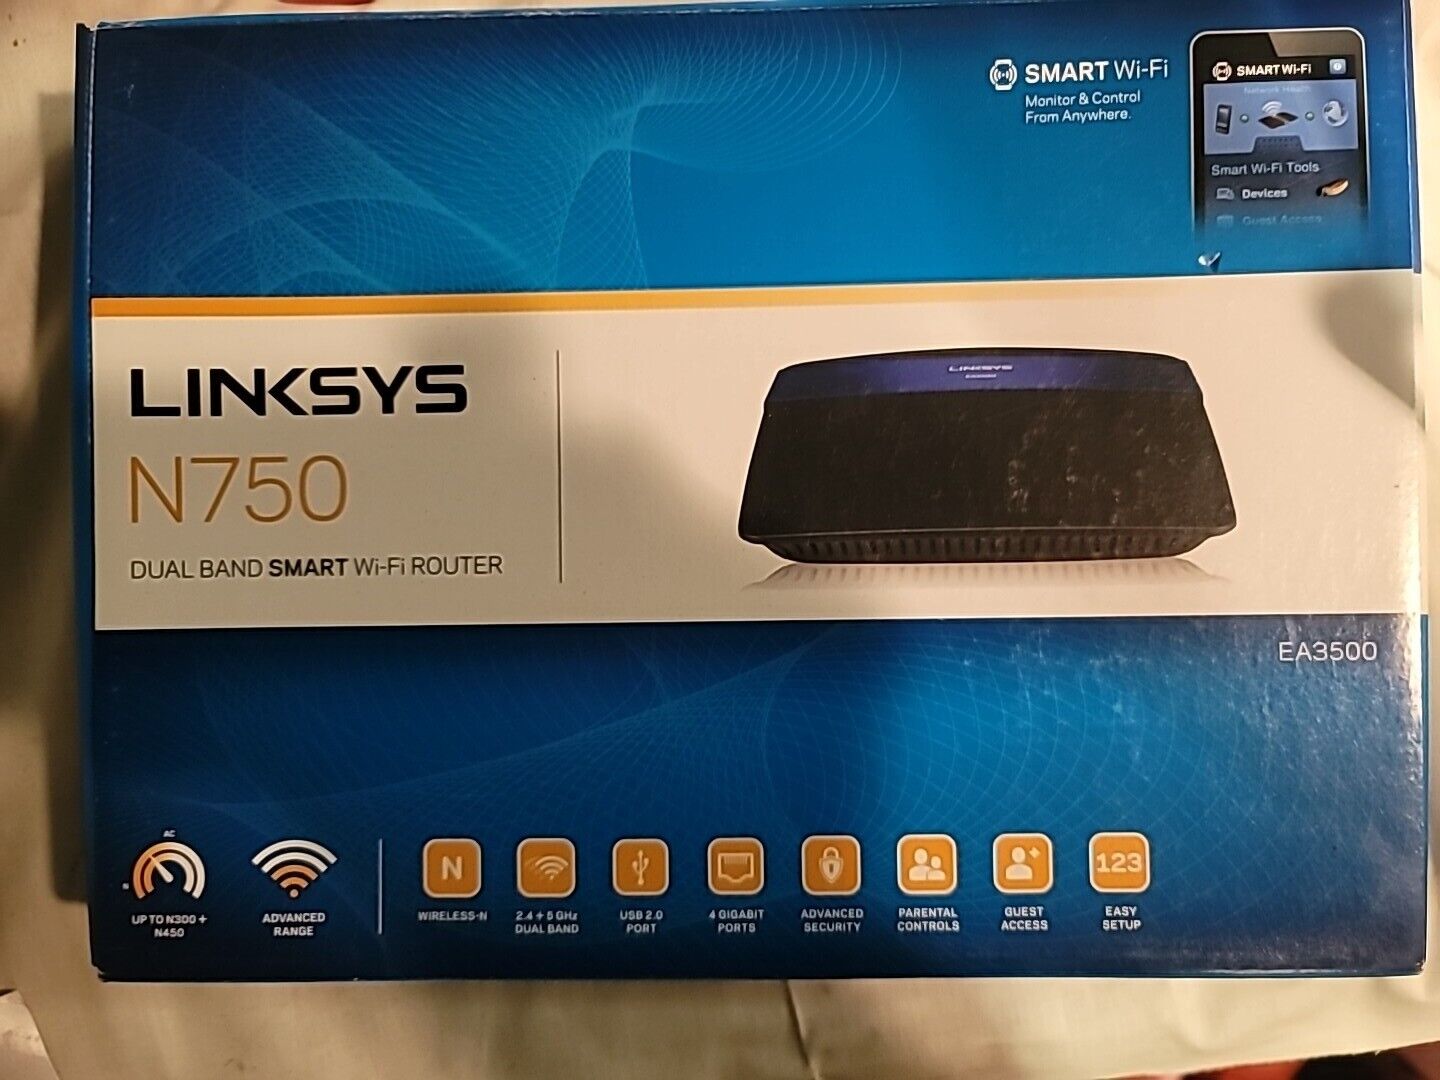 Cisco Linksys E1200 V2 Wireless-N300 Wi-Fi Router 4 Port Switch DD-WRT Capable